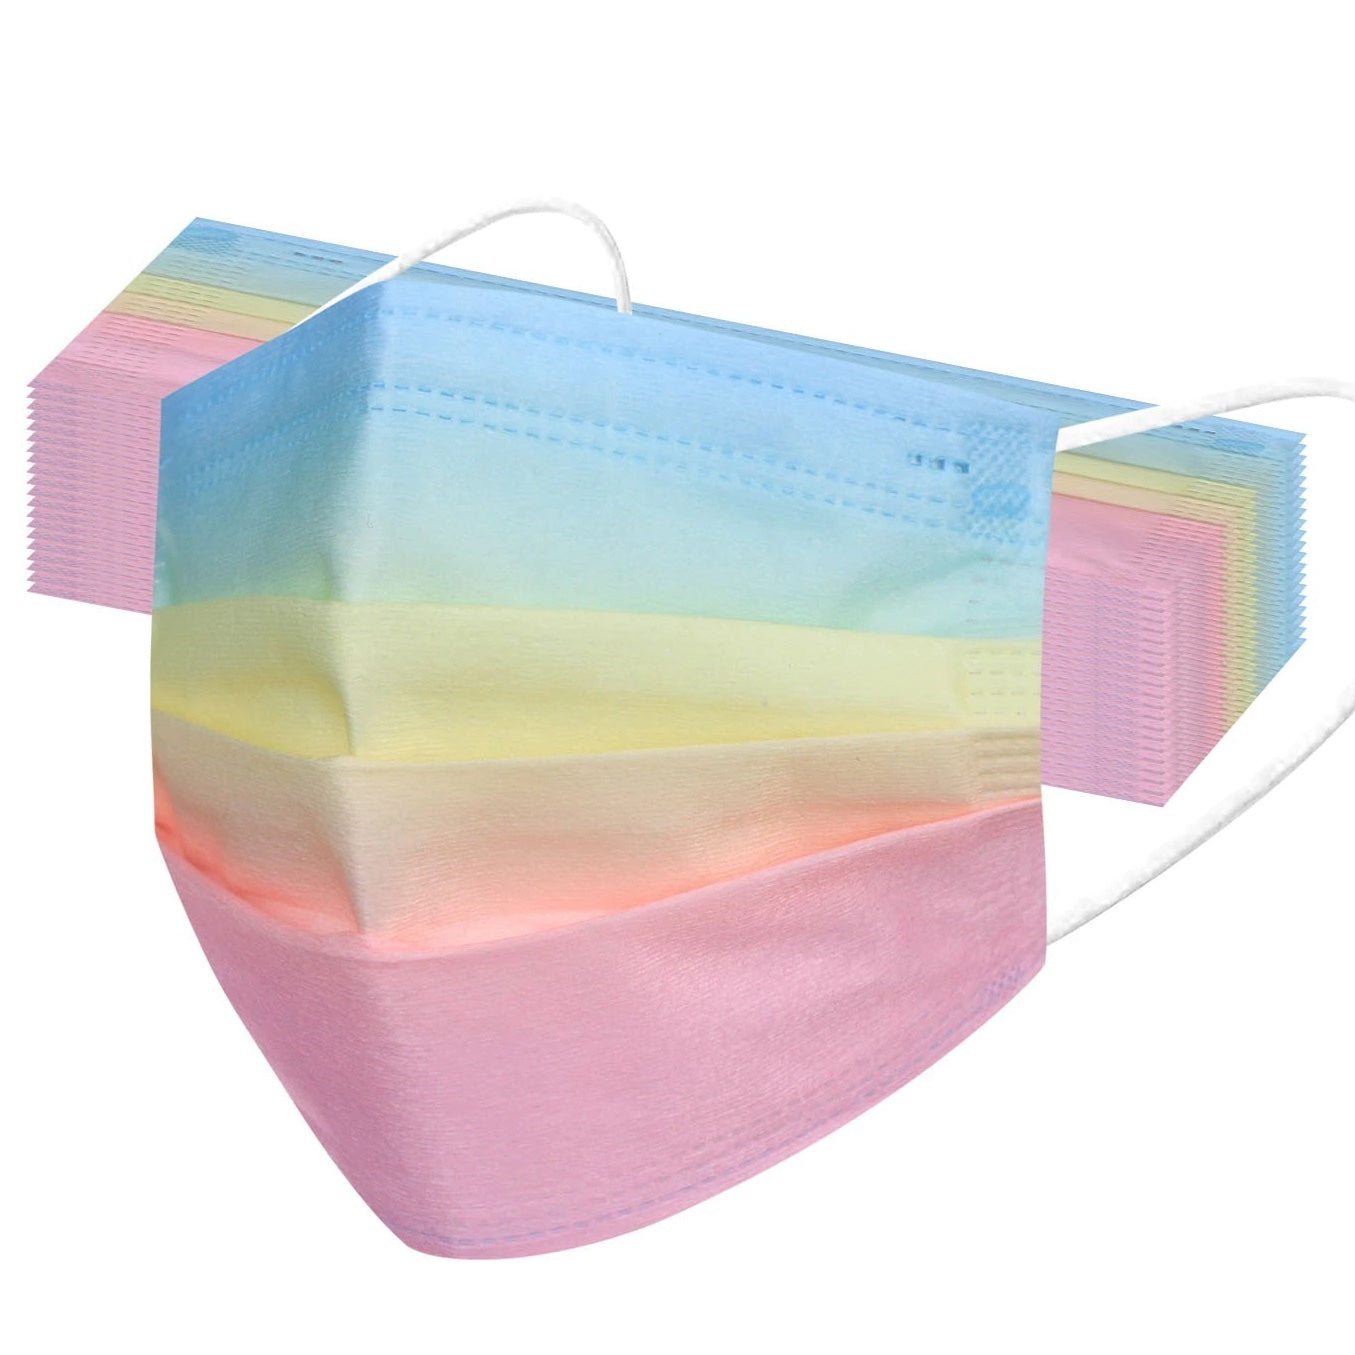 Pride Face Mask (50 pack) - 26.99 with free shipping on Gays+ Store 